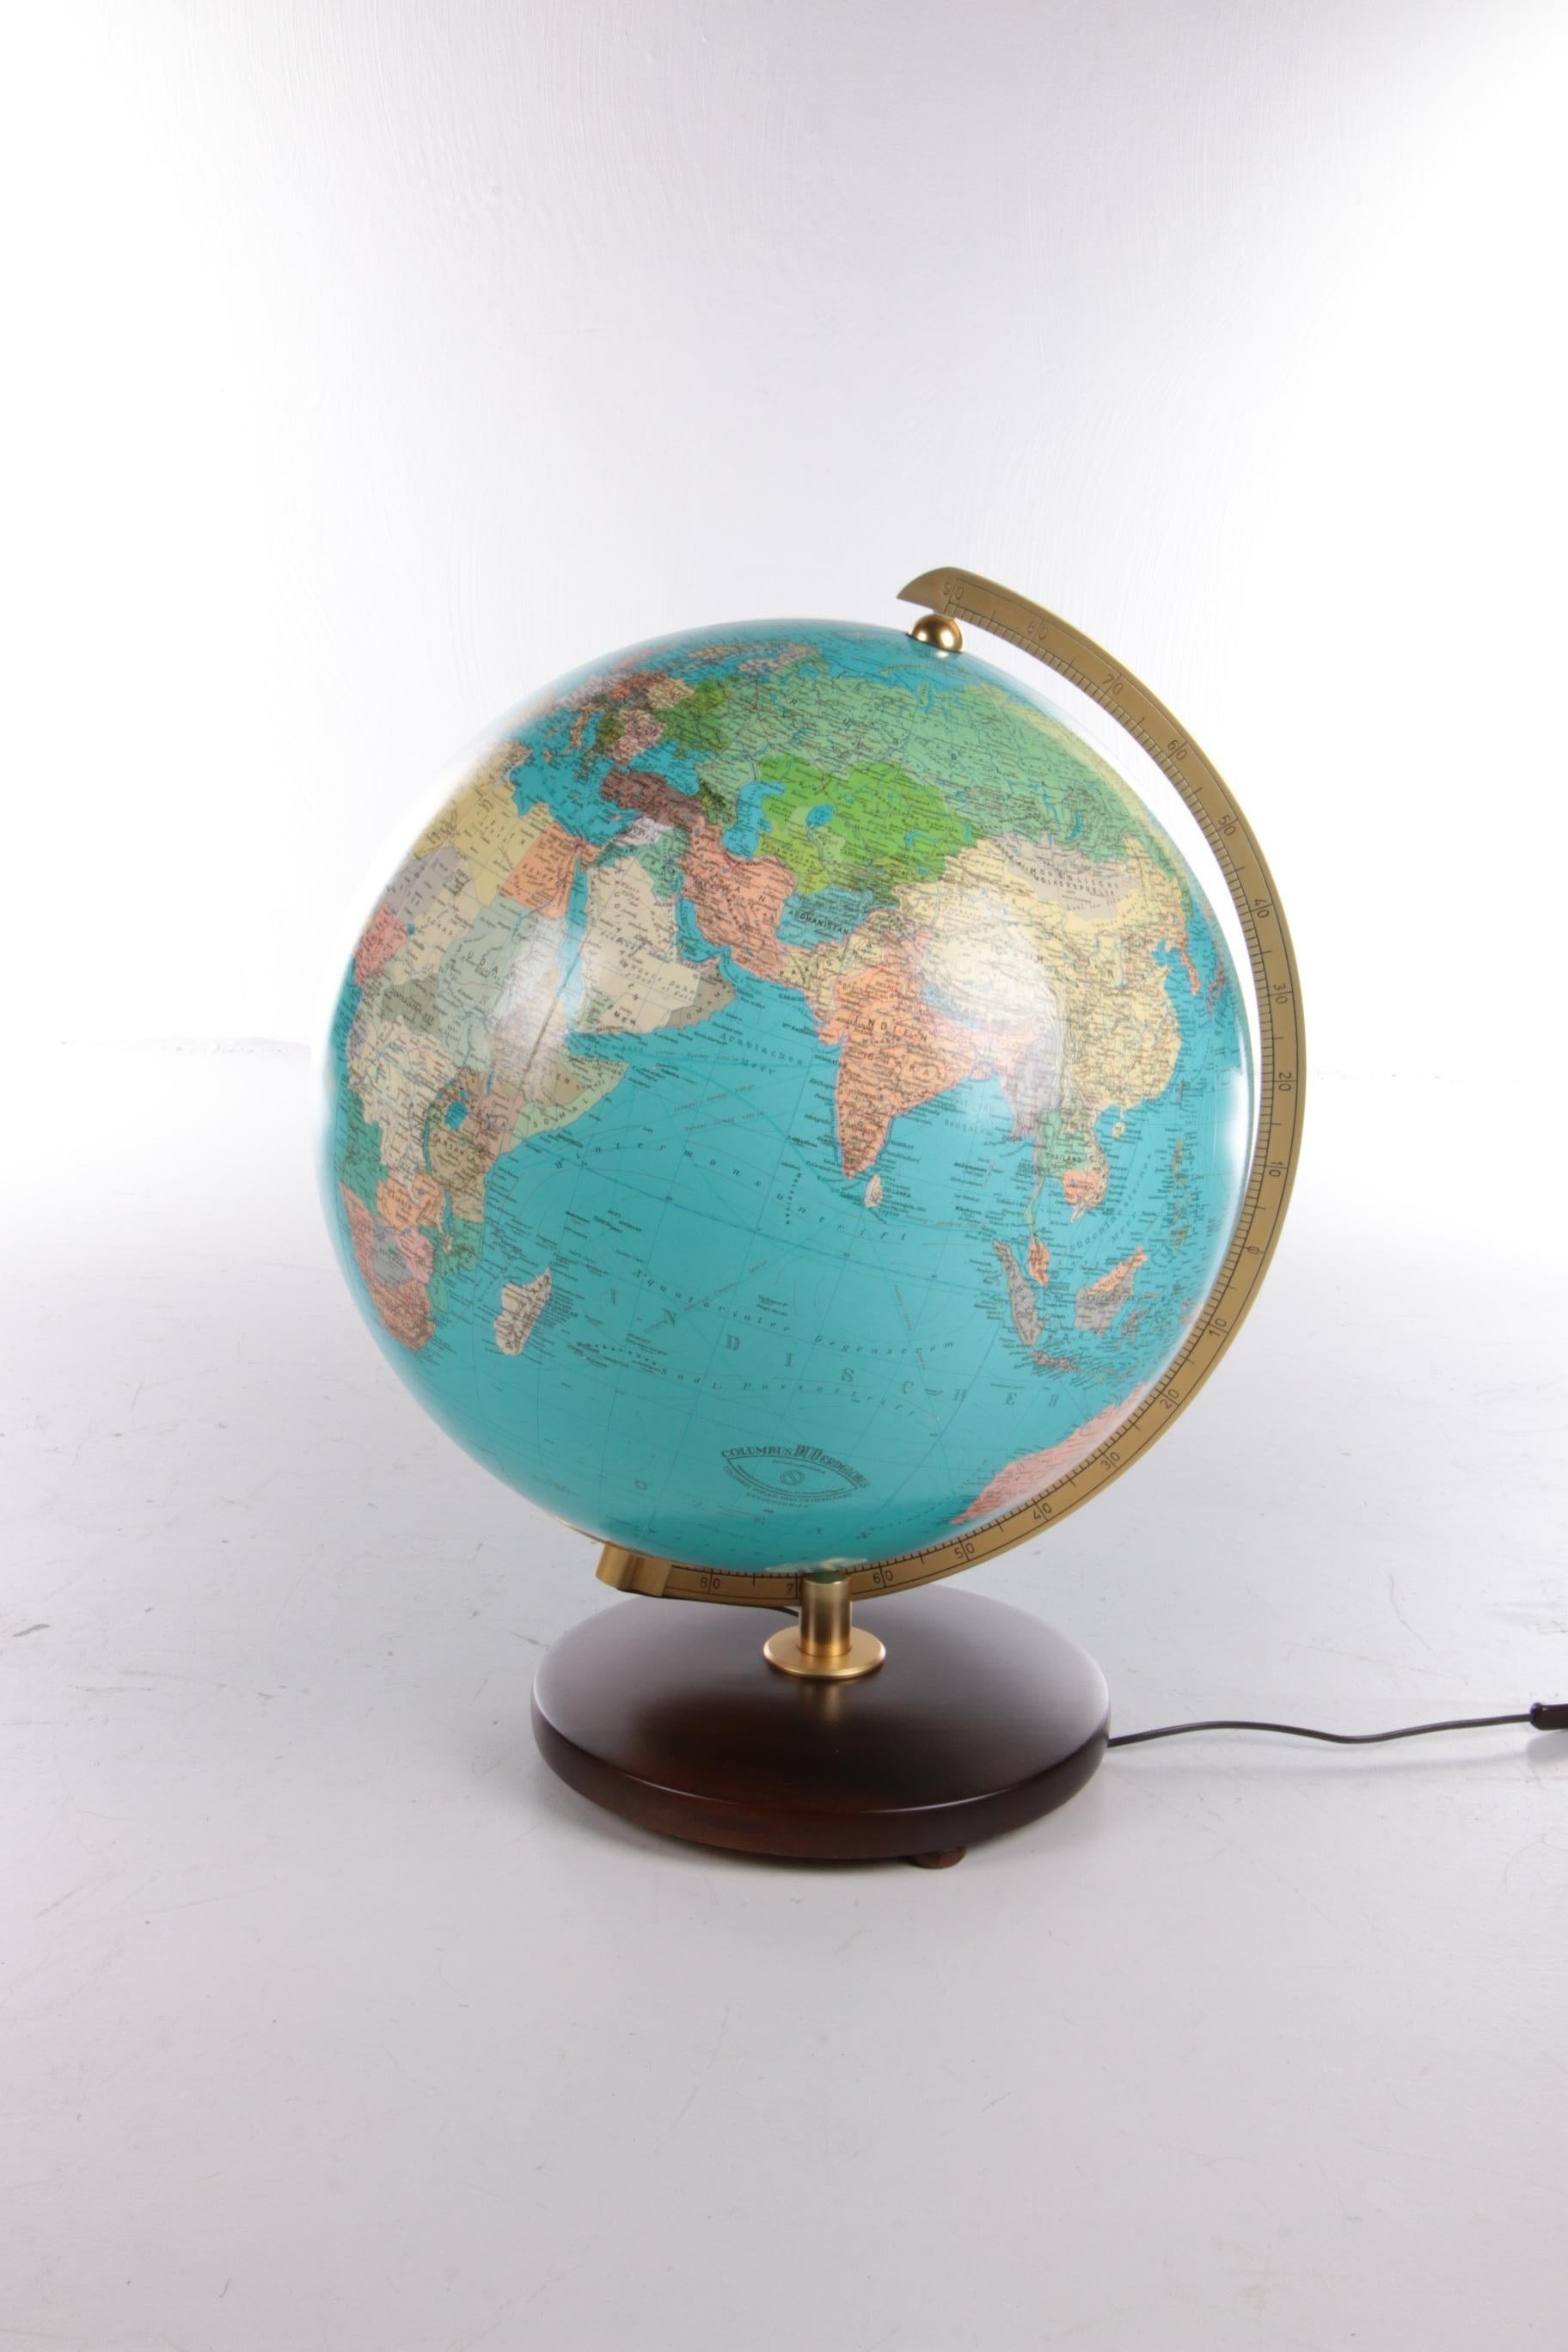 This beautiful globe comes from the German brand Columbus, and is dated circa 1975. The language on the globe is German.

Made by Verlag and design by Paul Oestergaard.

The globe is equipped with lighting. In excellent condition.

The globe